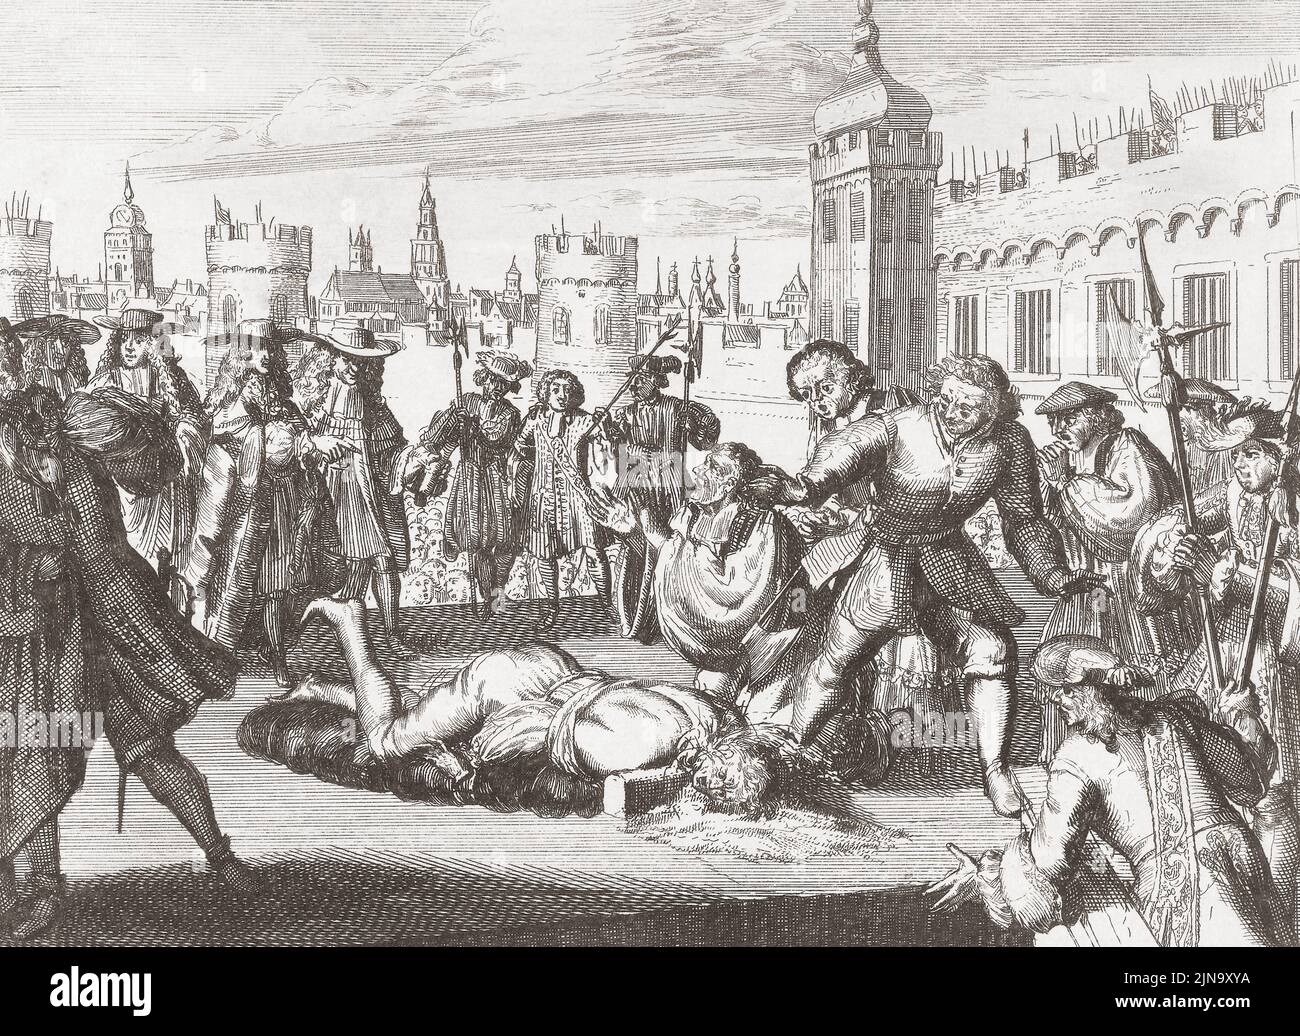 The execution of James Scott, 1st Duke of Monmouth, 1st Duke of Buccleuch, 1649 - 1685.  Monmouth, an illigitimate son of King Charles II was executed for treason on Tower Hill on July 15, 1685 after the failure of what has become known as the Monmouth Rebellion, also known as the Pitchfork Rebellion or the West Country Rebellion.  His beheading was famously botched, by the executioner Jack Ketch who took as many as five blows of the axe and a final cut with a knife to sever his head.  After a 17th century work. Stock Photo